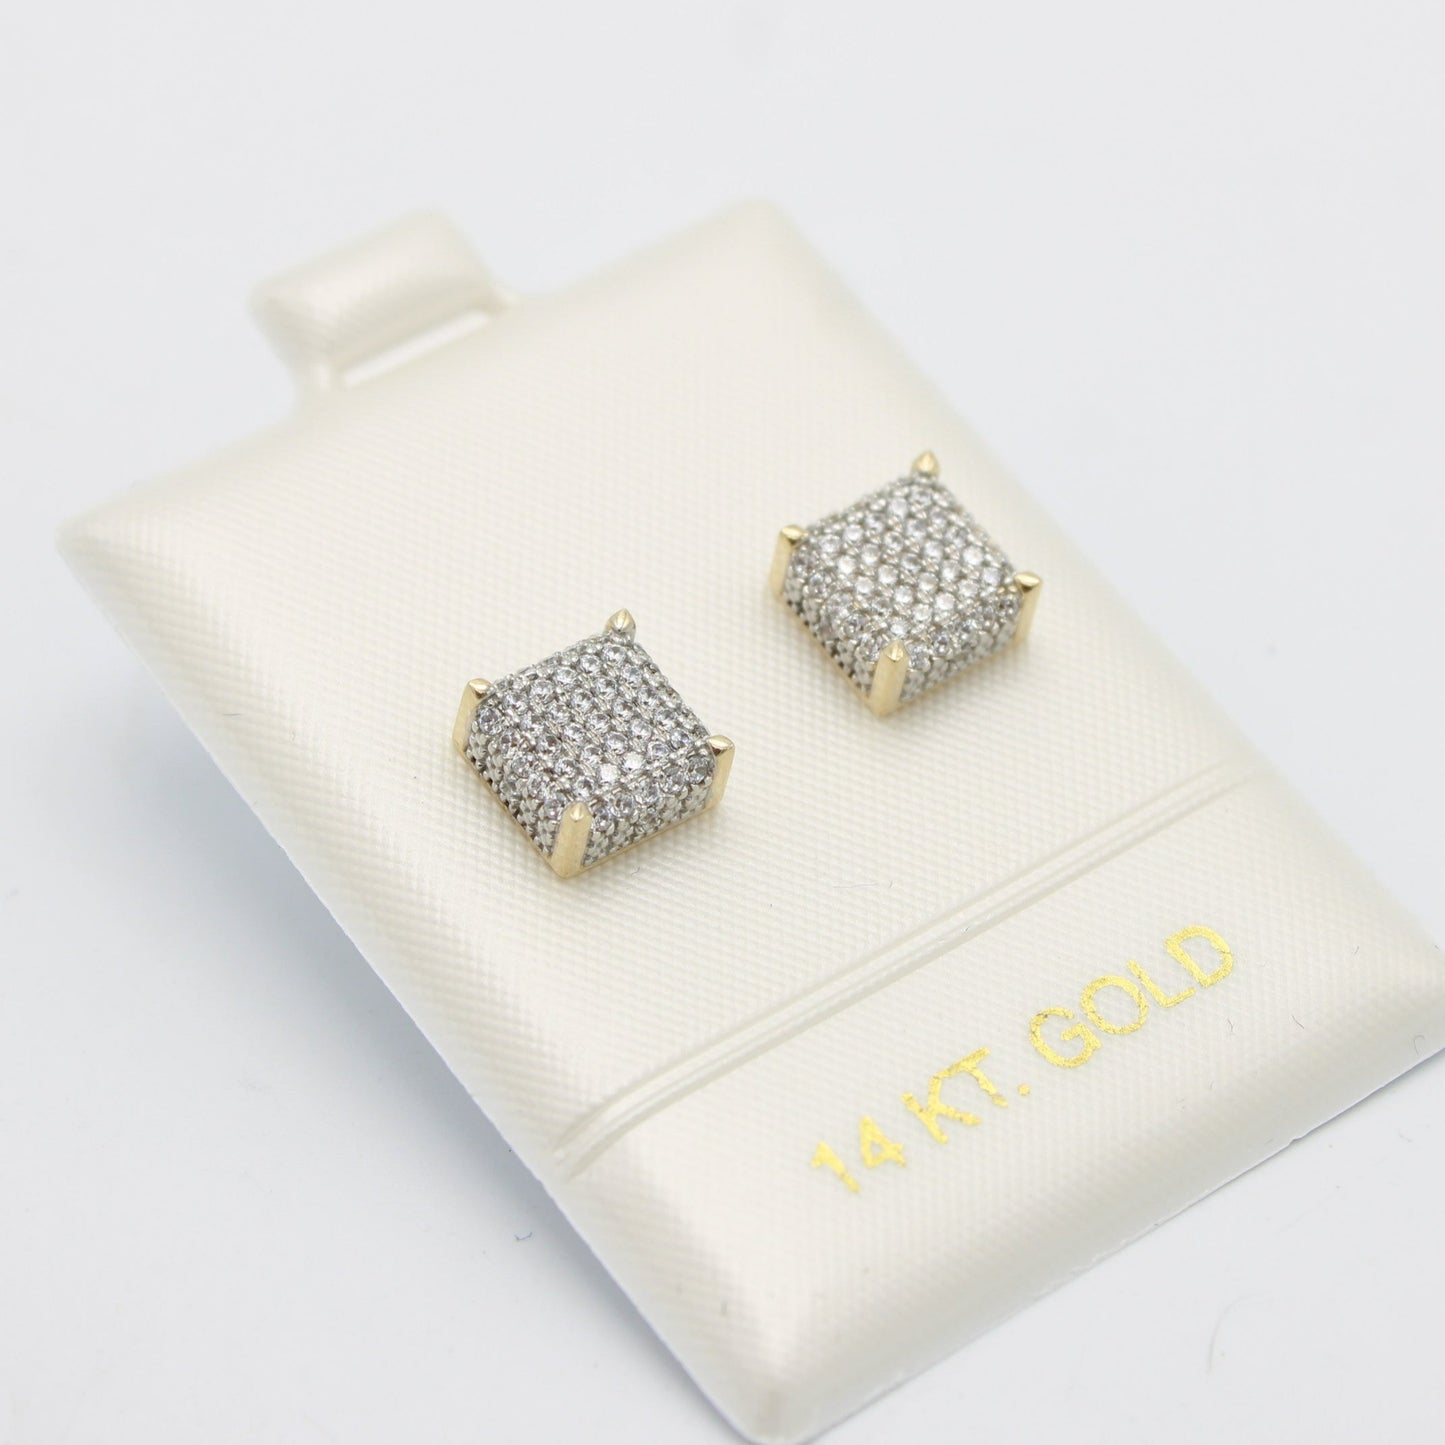 Offer  $264.99 Squeare Earrings Cz Stones Yellow Gold